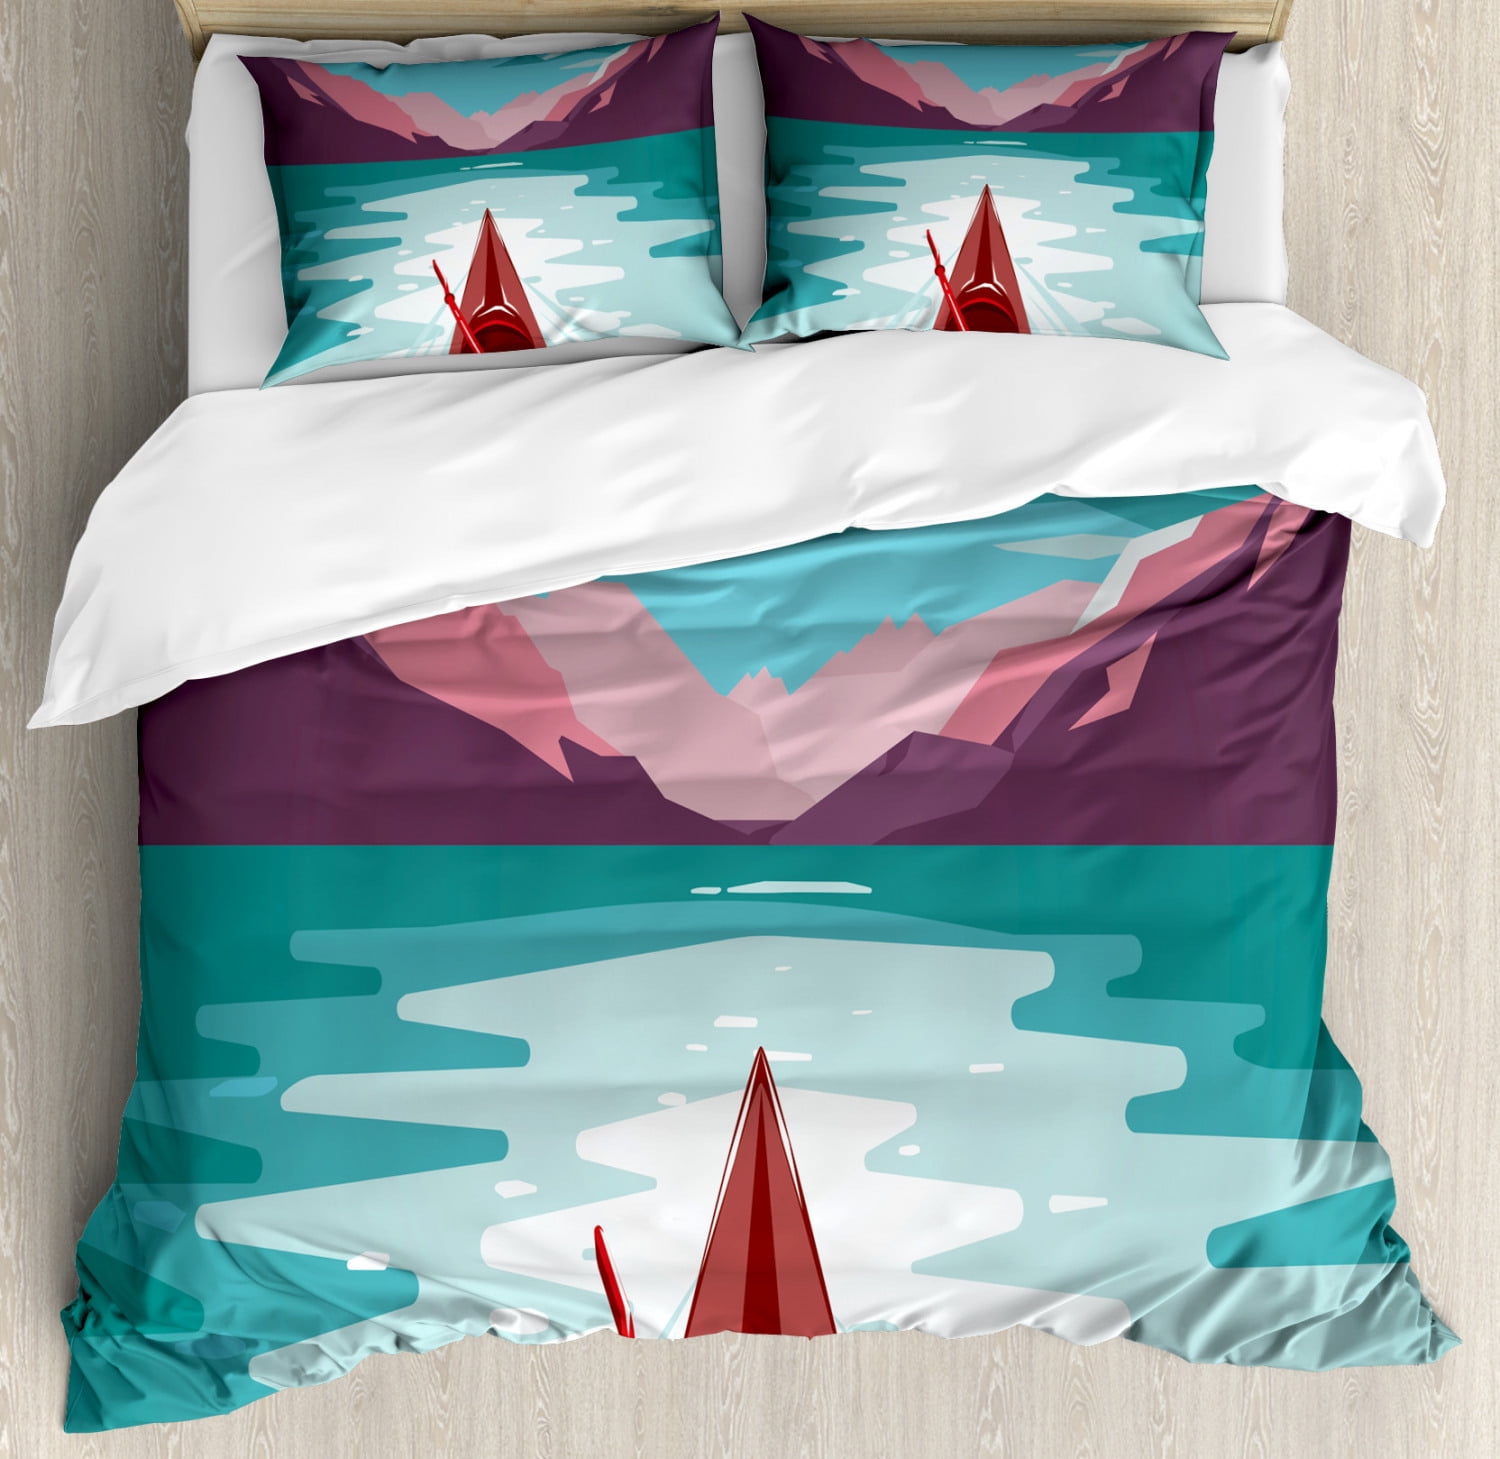 Tropical Duvet Cover Set King Size Kayak In The River Extreme